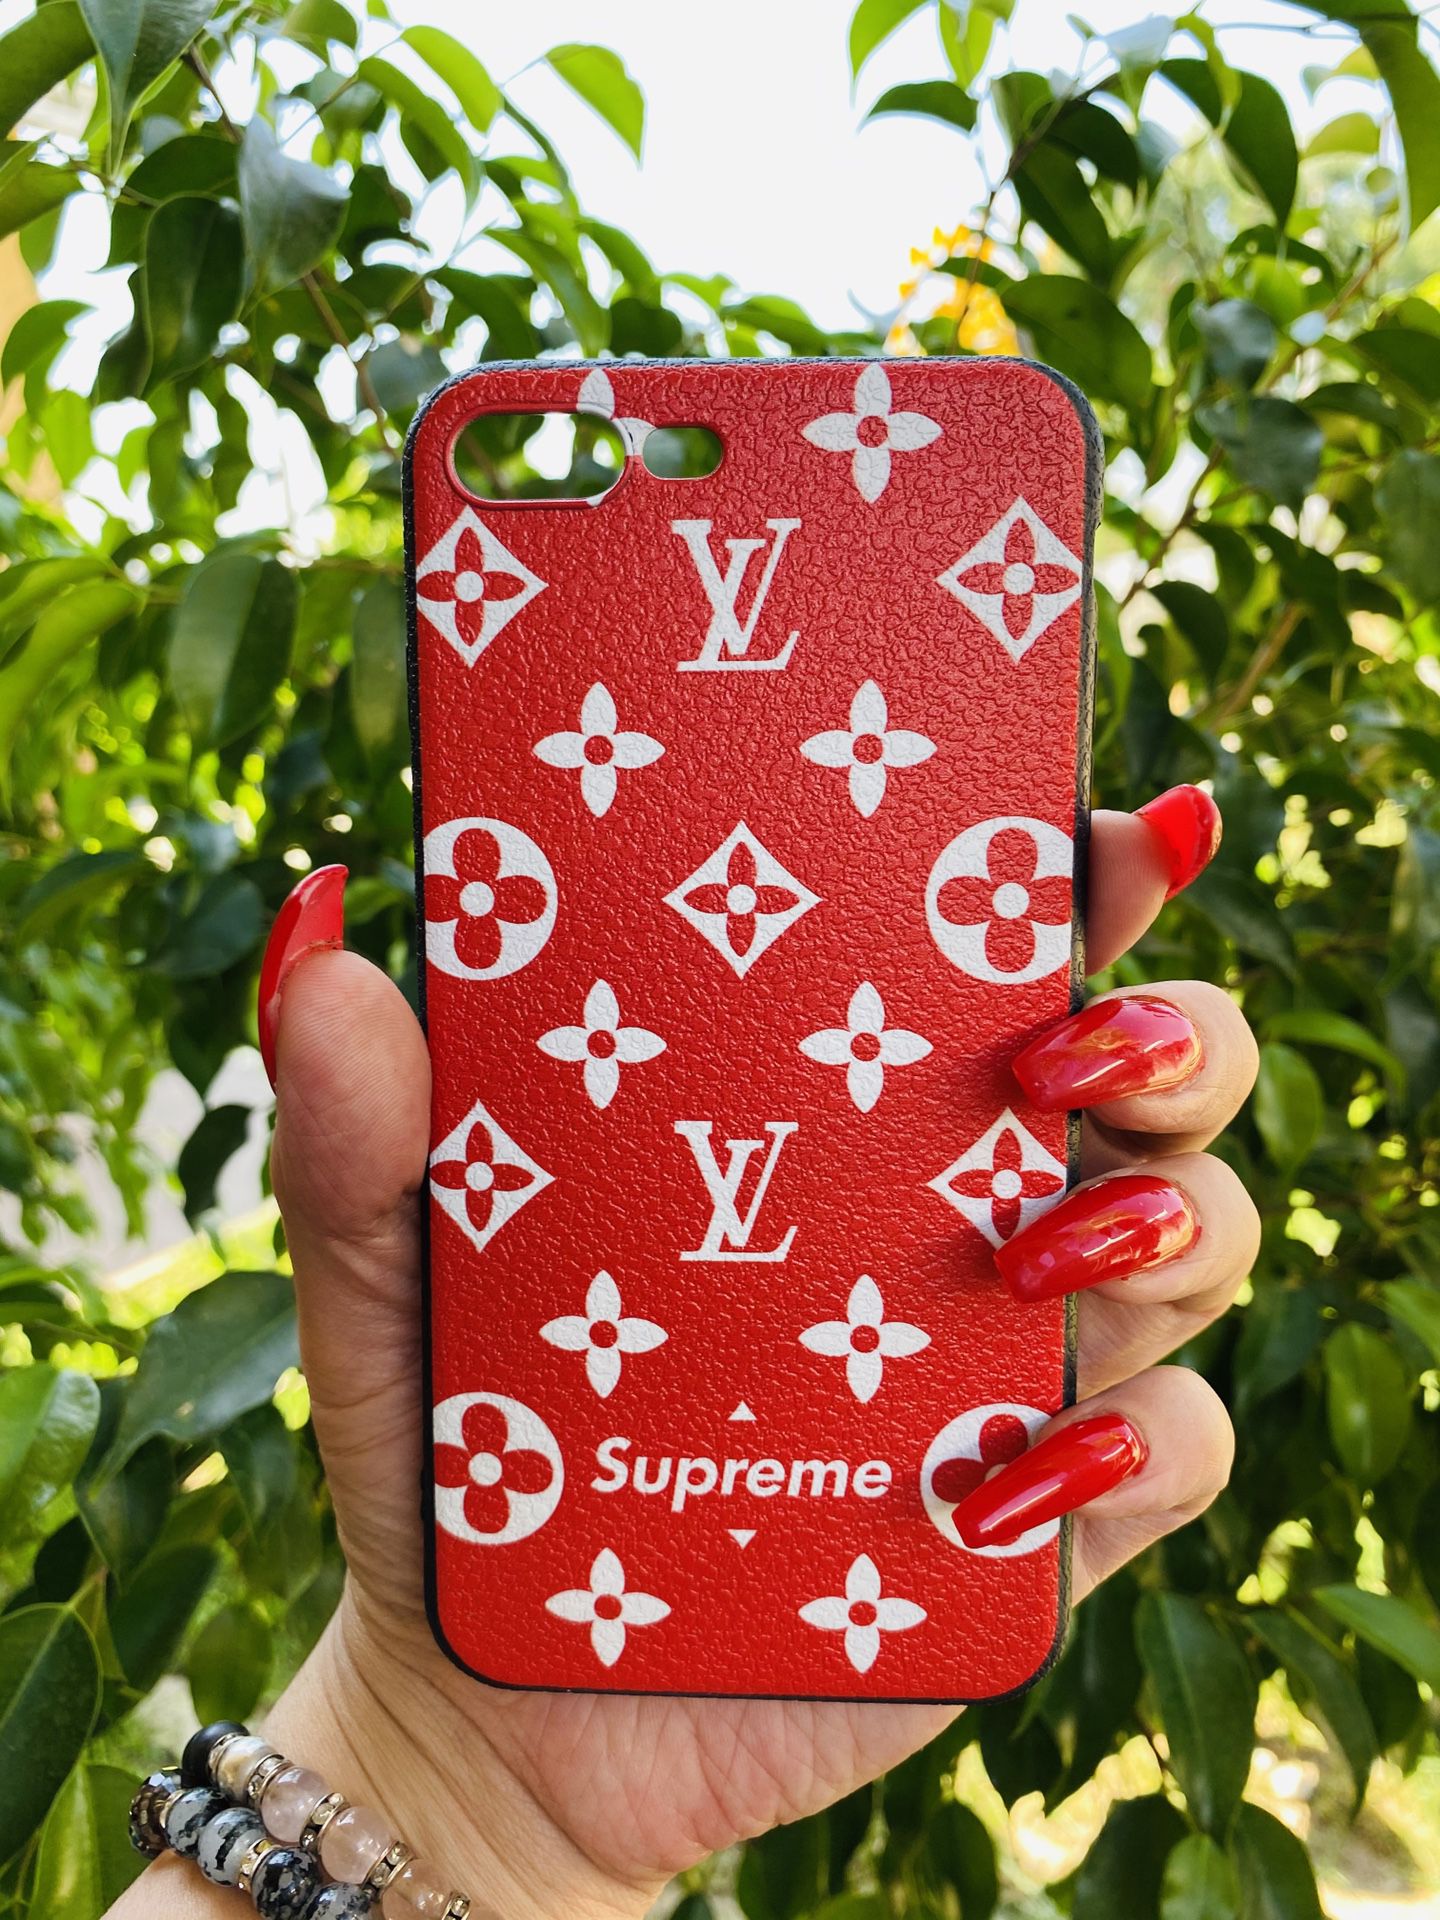 Brand new cool iphone 7+ or 8+ PLUS case cover rubber red girls guys mens womens skate skateboard swag brands hype hypebeast fundas